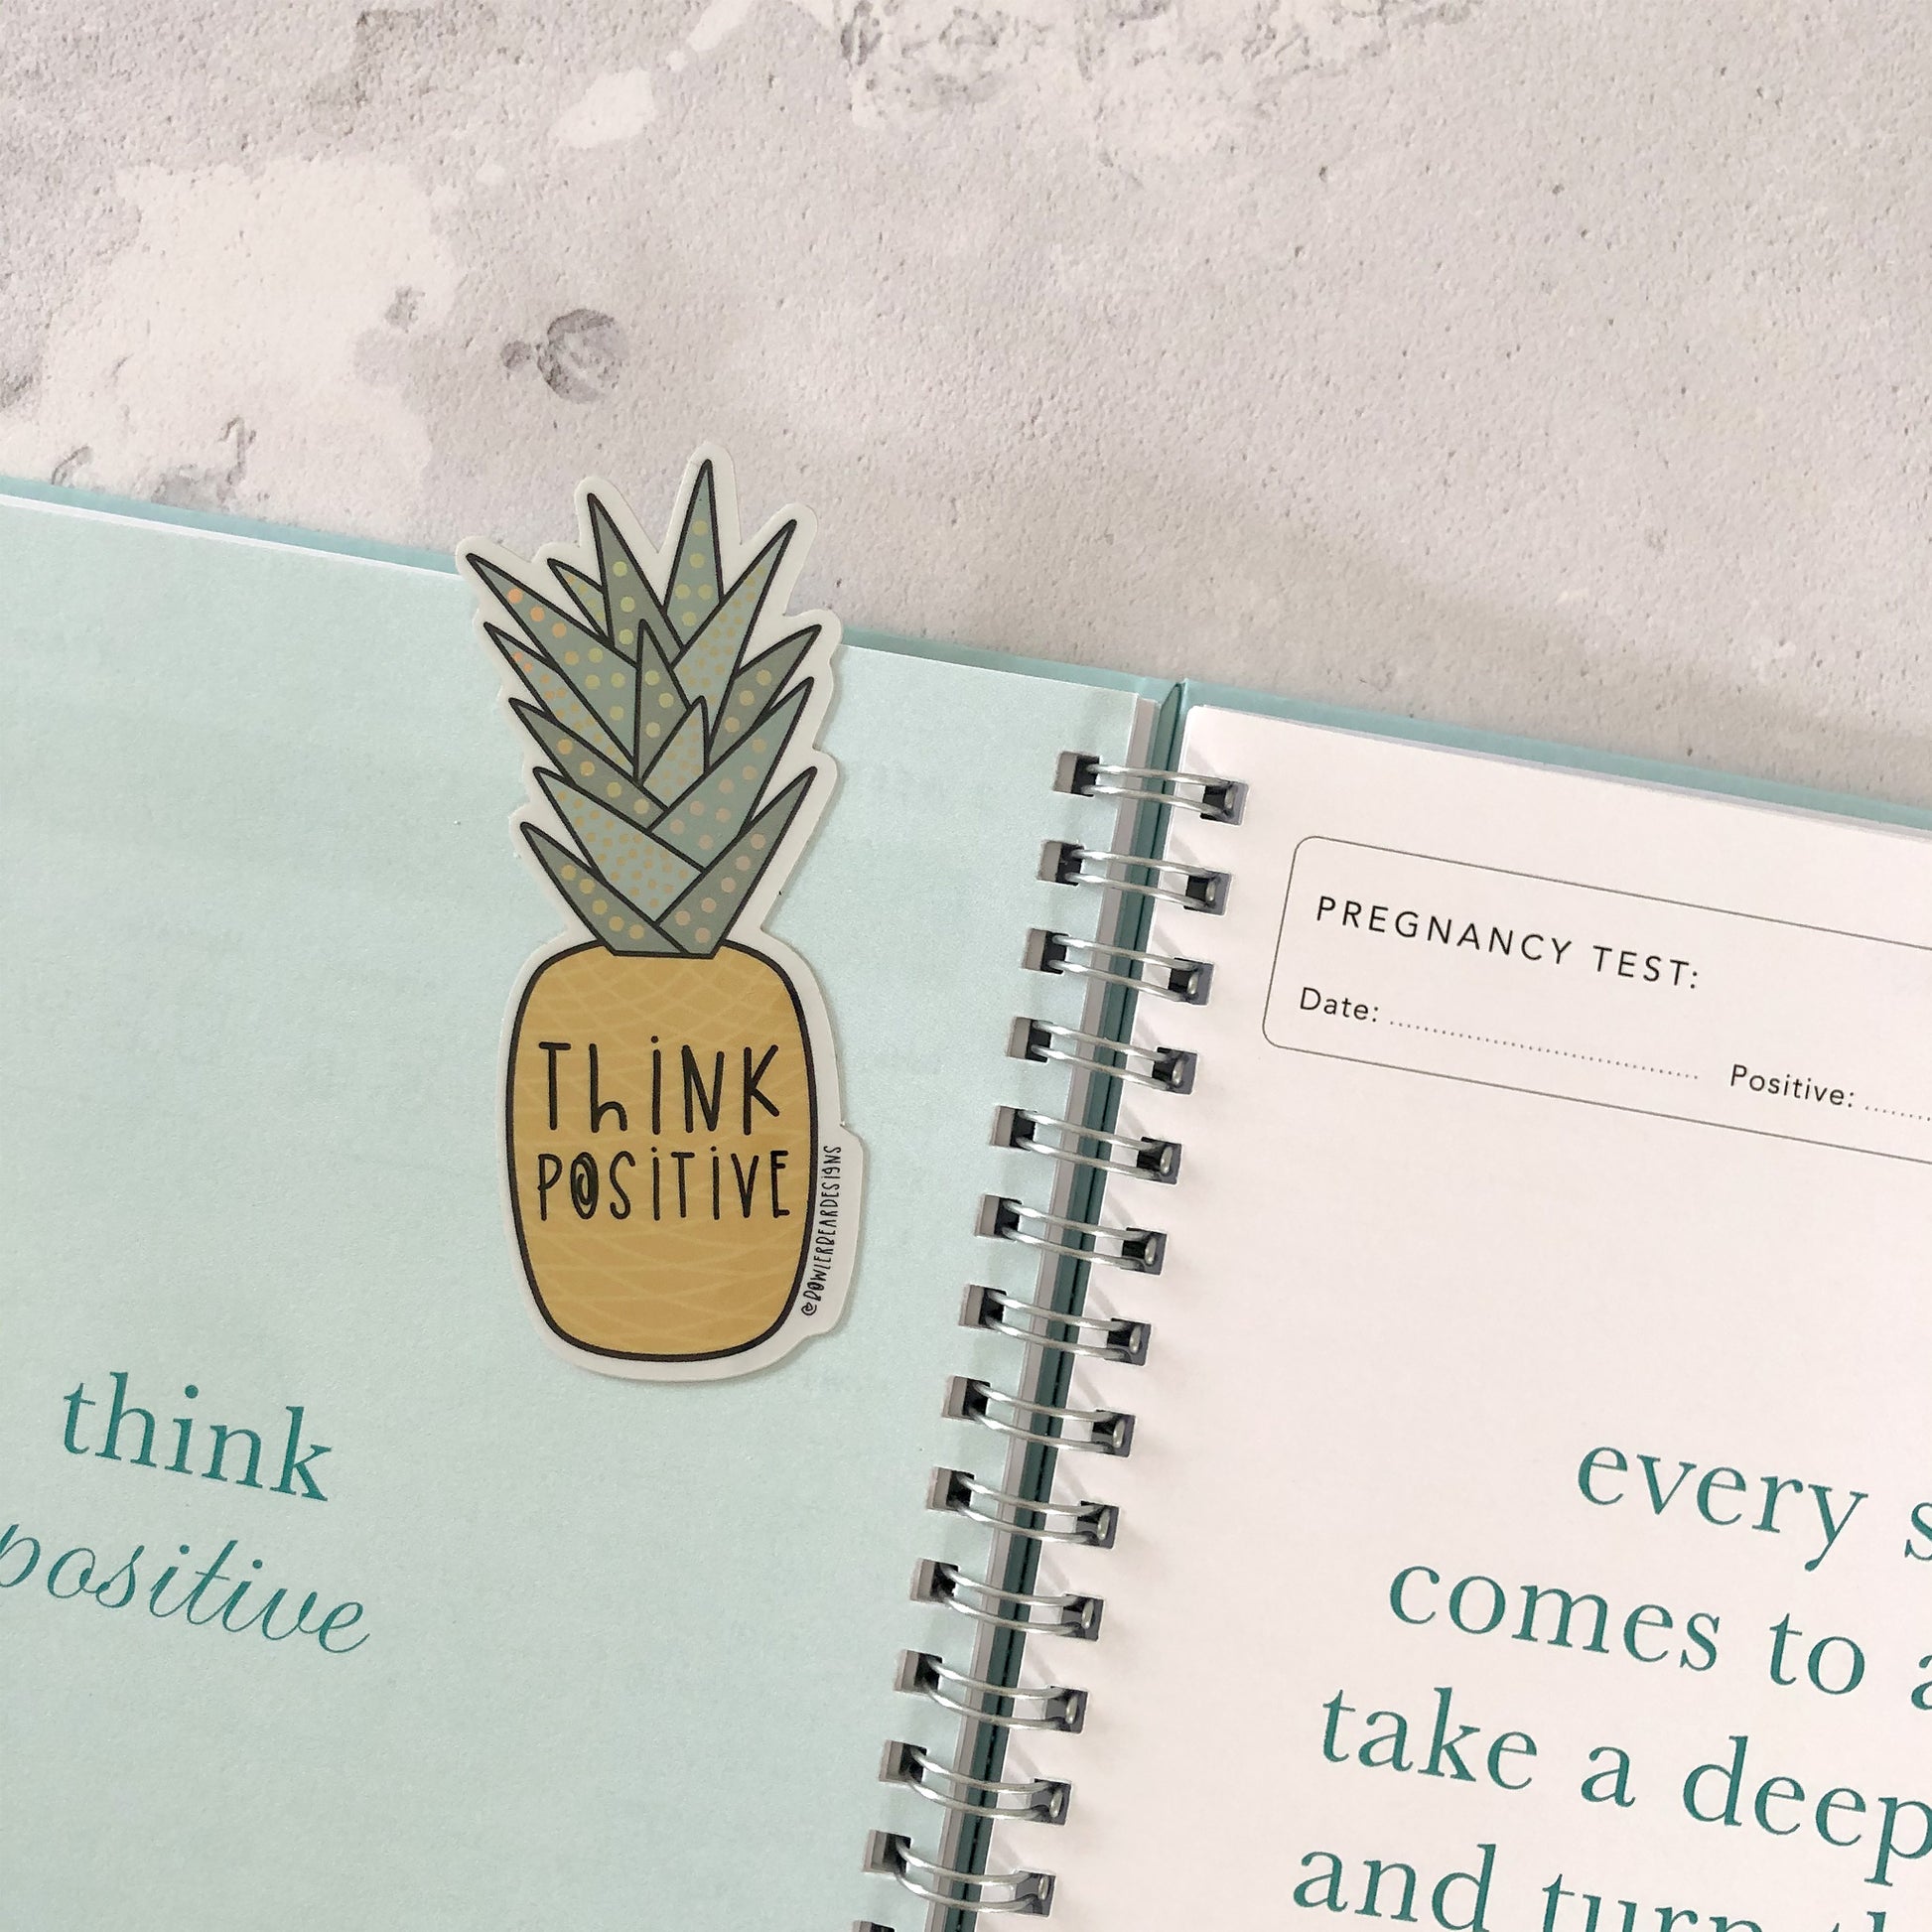 Fine-apple the Pineapple Novelty Gift, Motivational, Affirmation, Pick Me  Up, Youre Fine, Everythings Ok, Brighten Your Day, Handmade UK -   Finland